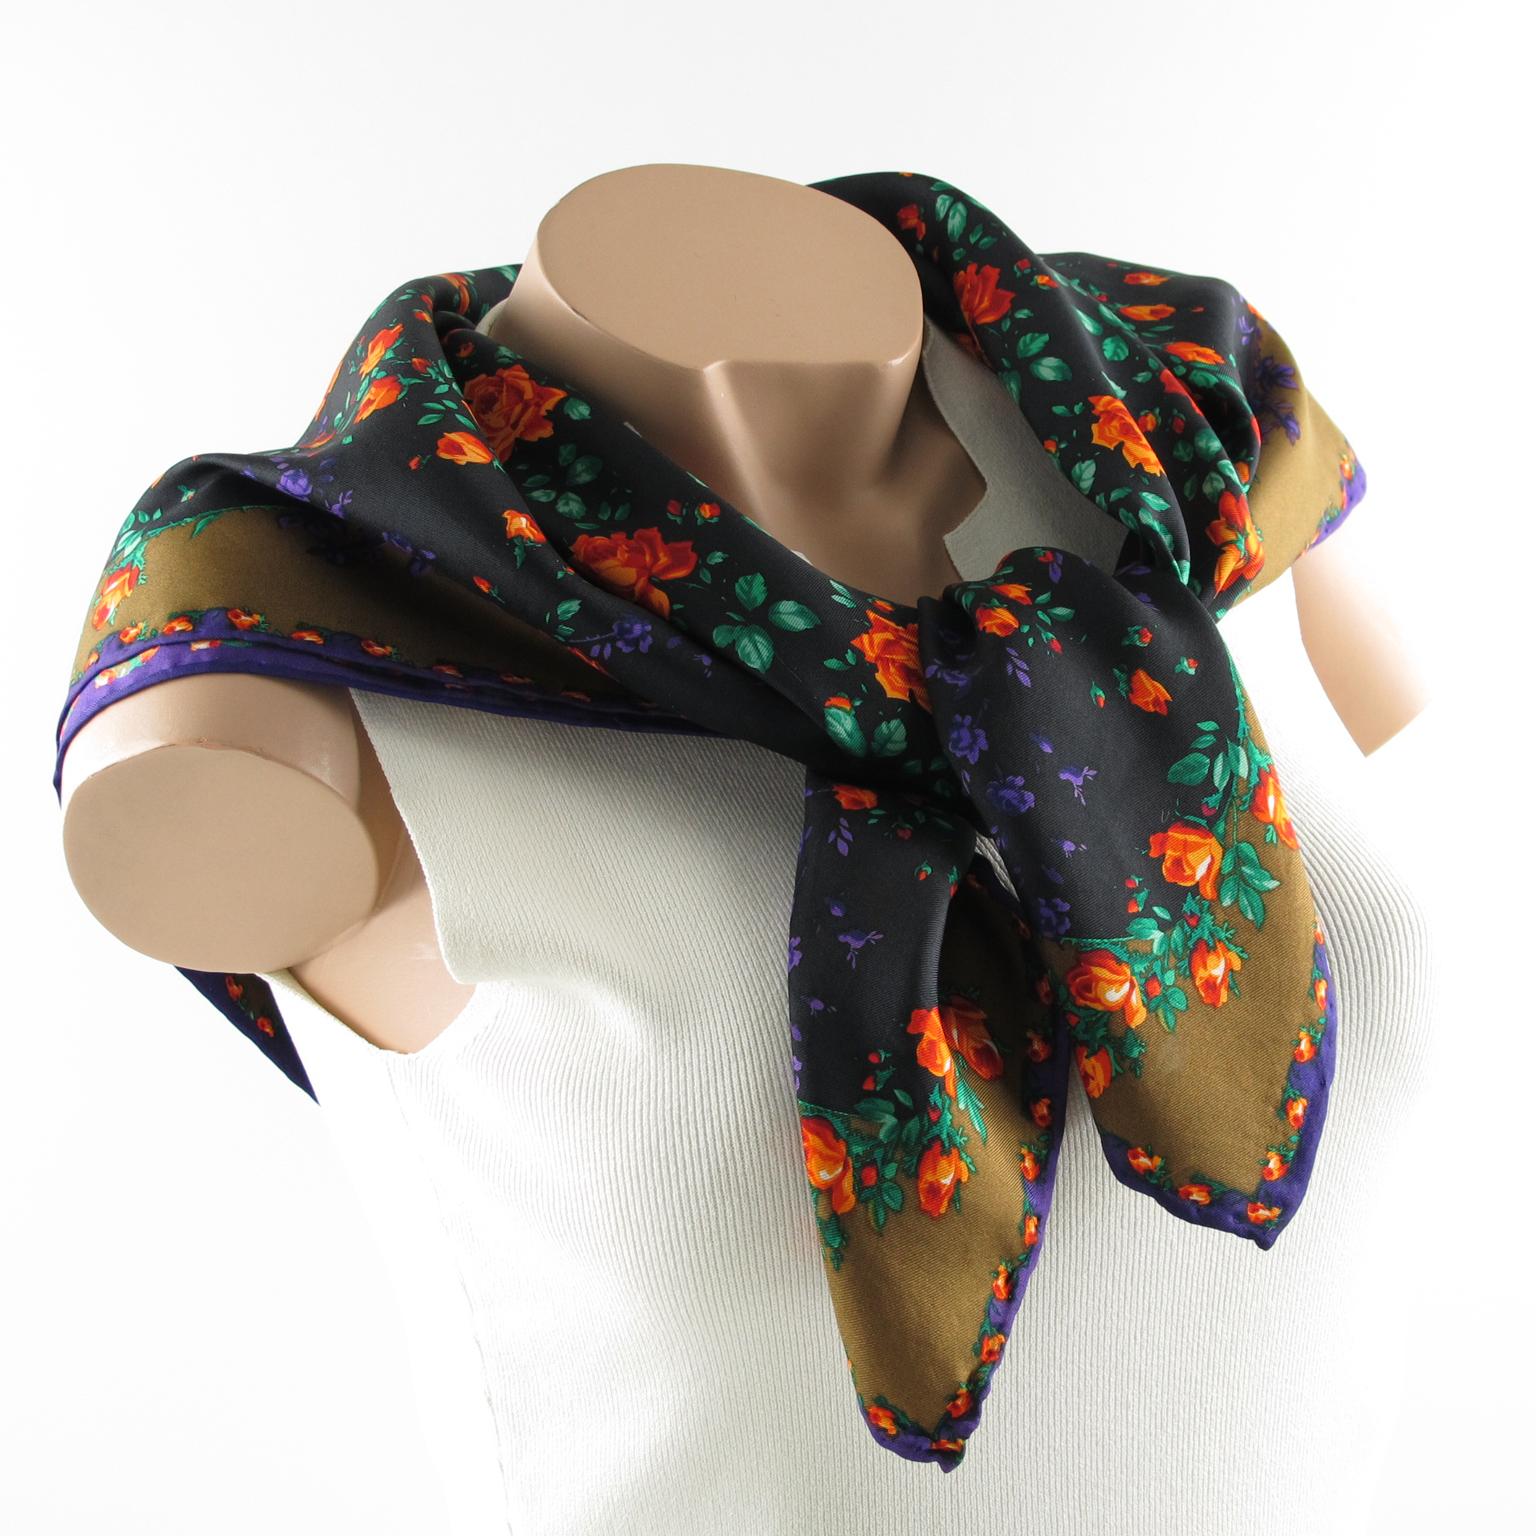 Lovely silk scarf by Kenzo, Paris. Typical Kenzo floral pattern in a fabulous combination of purple, orange, black, green and bronze colors with a large brand signature on corner. The colors are bright and vibrant, care-tag on the side, hand-rolled